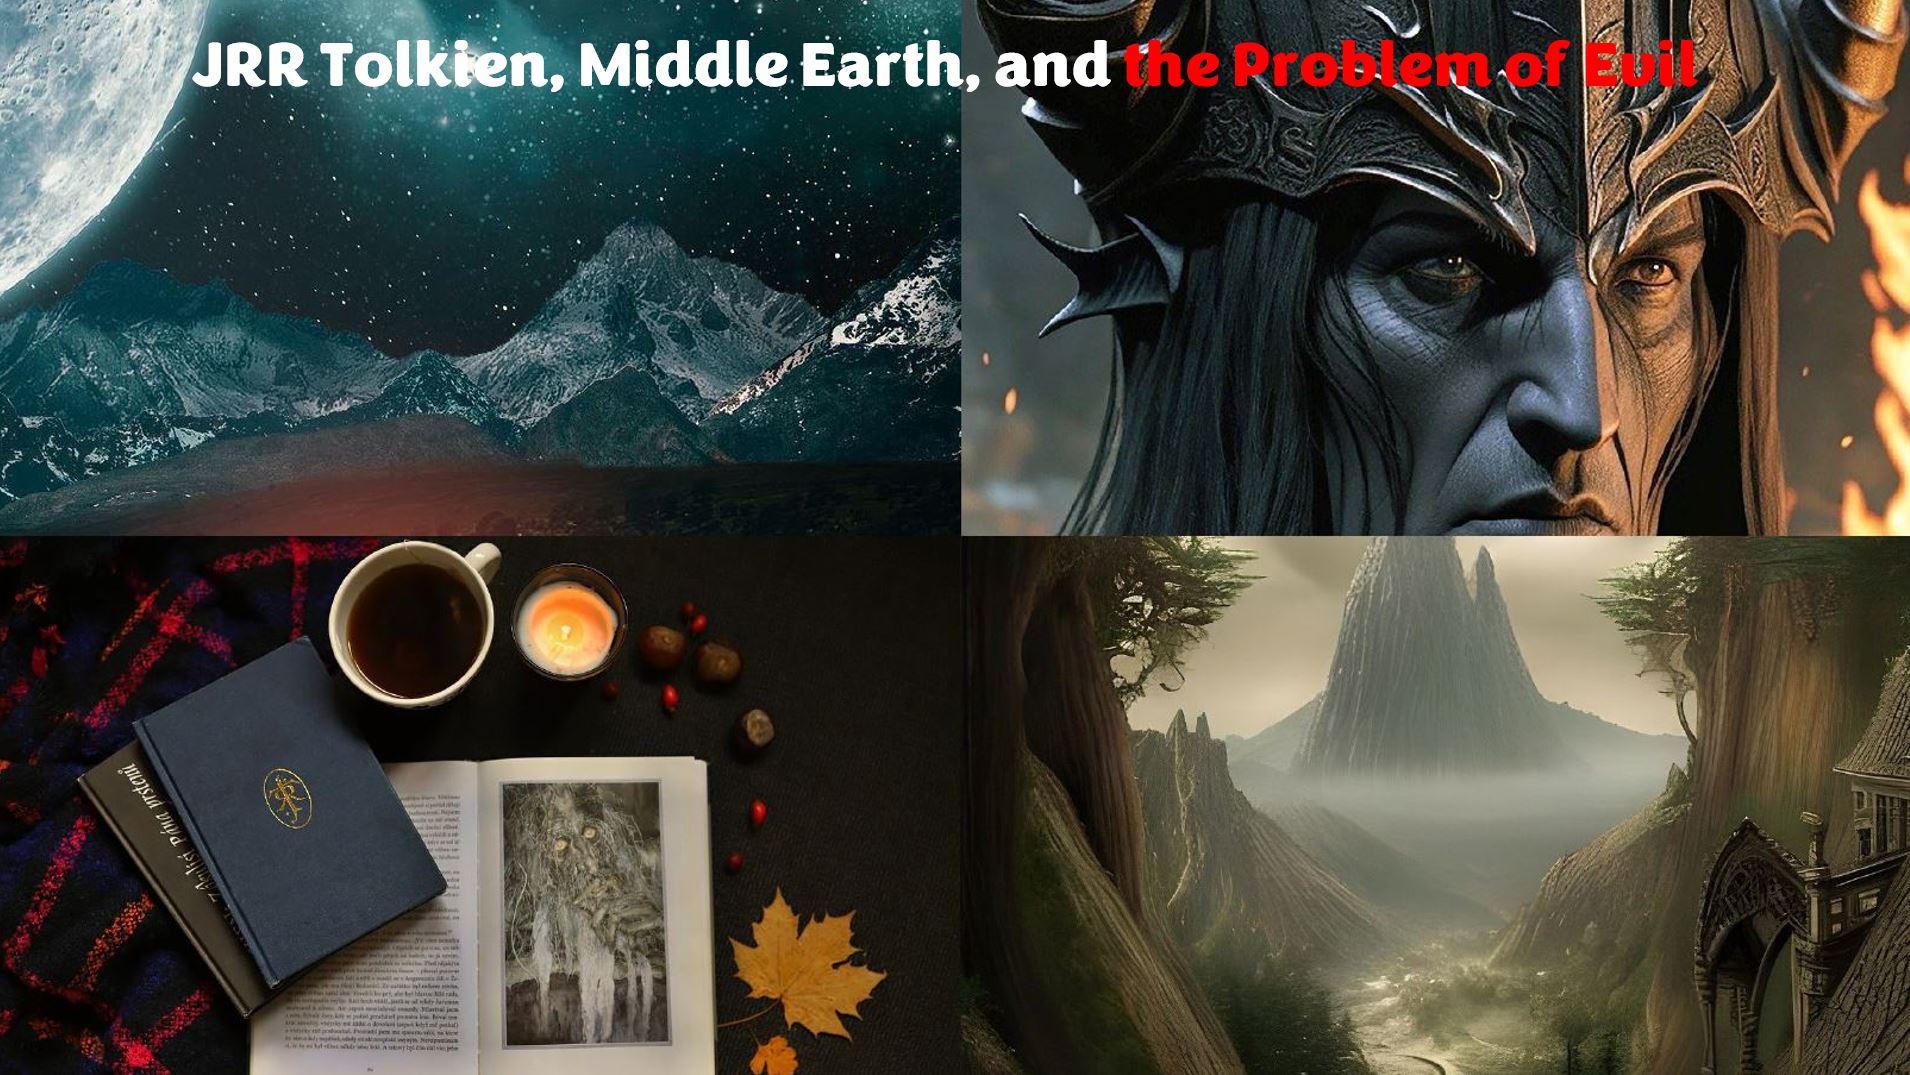 How Tolkien created Middle-earth, JRR Tolkien